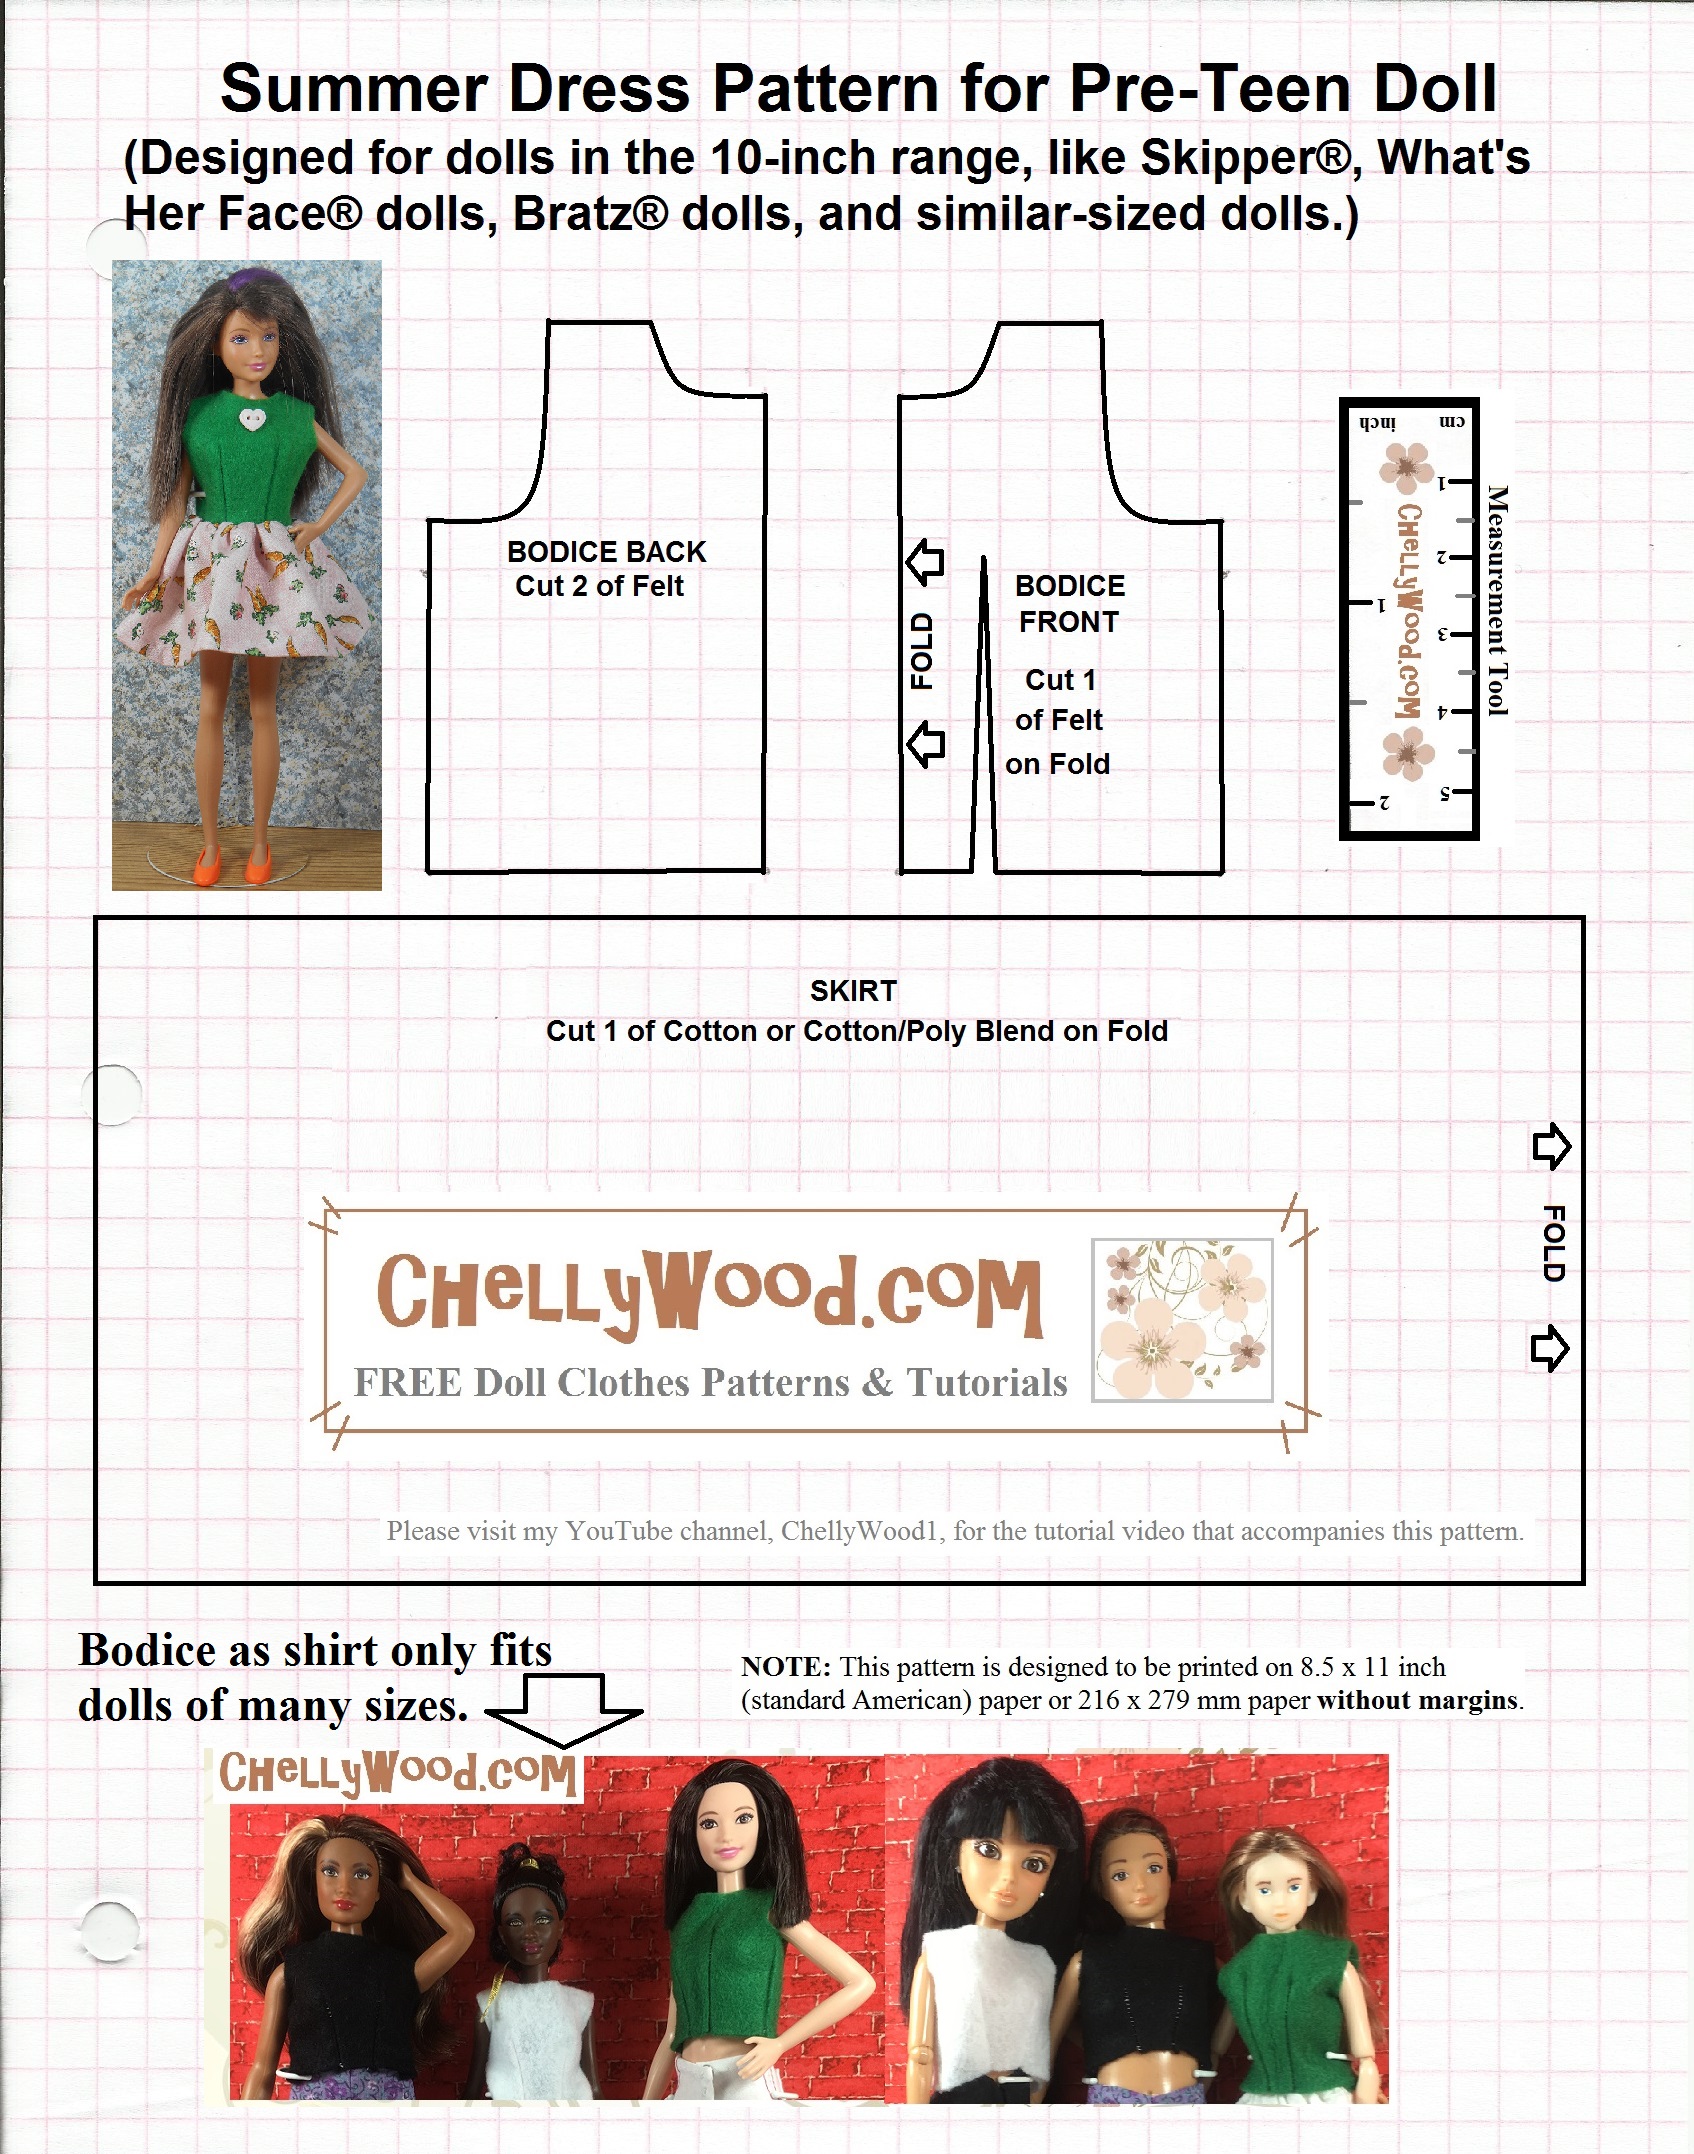 What are standard American Doll measurements?